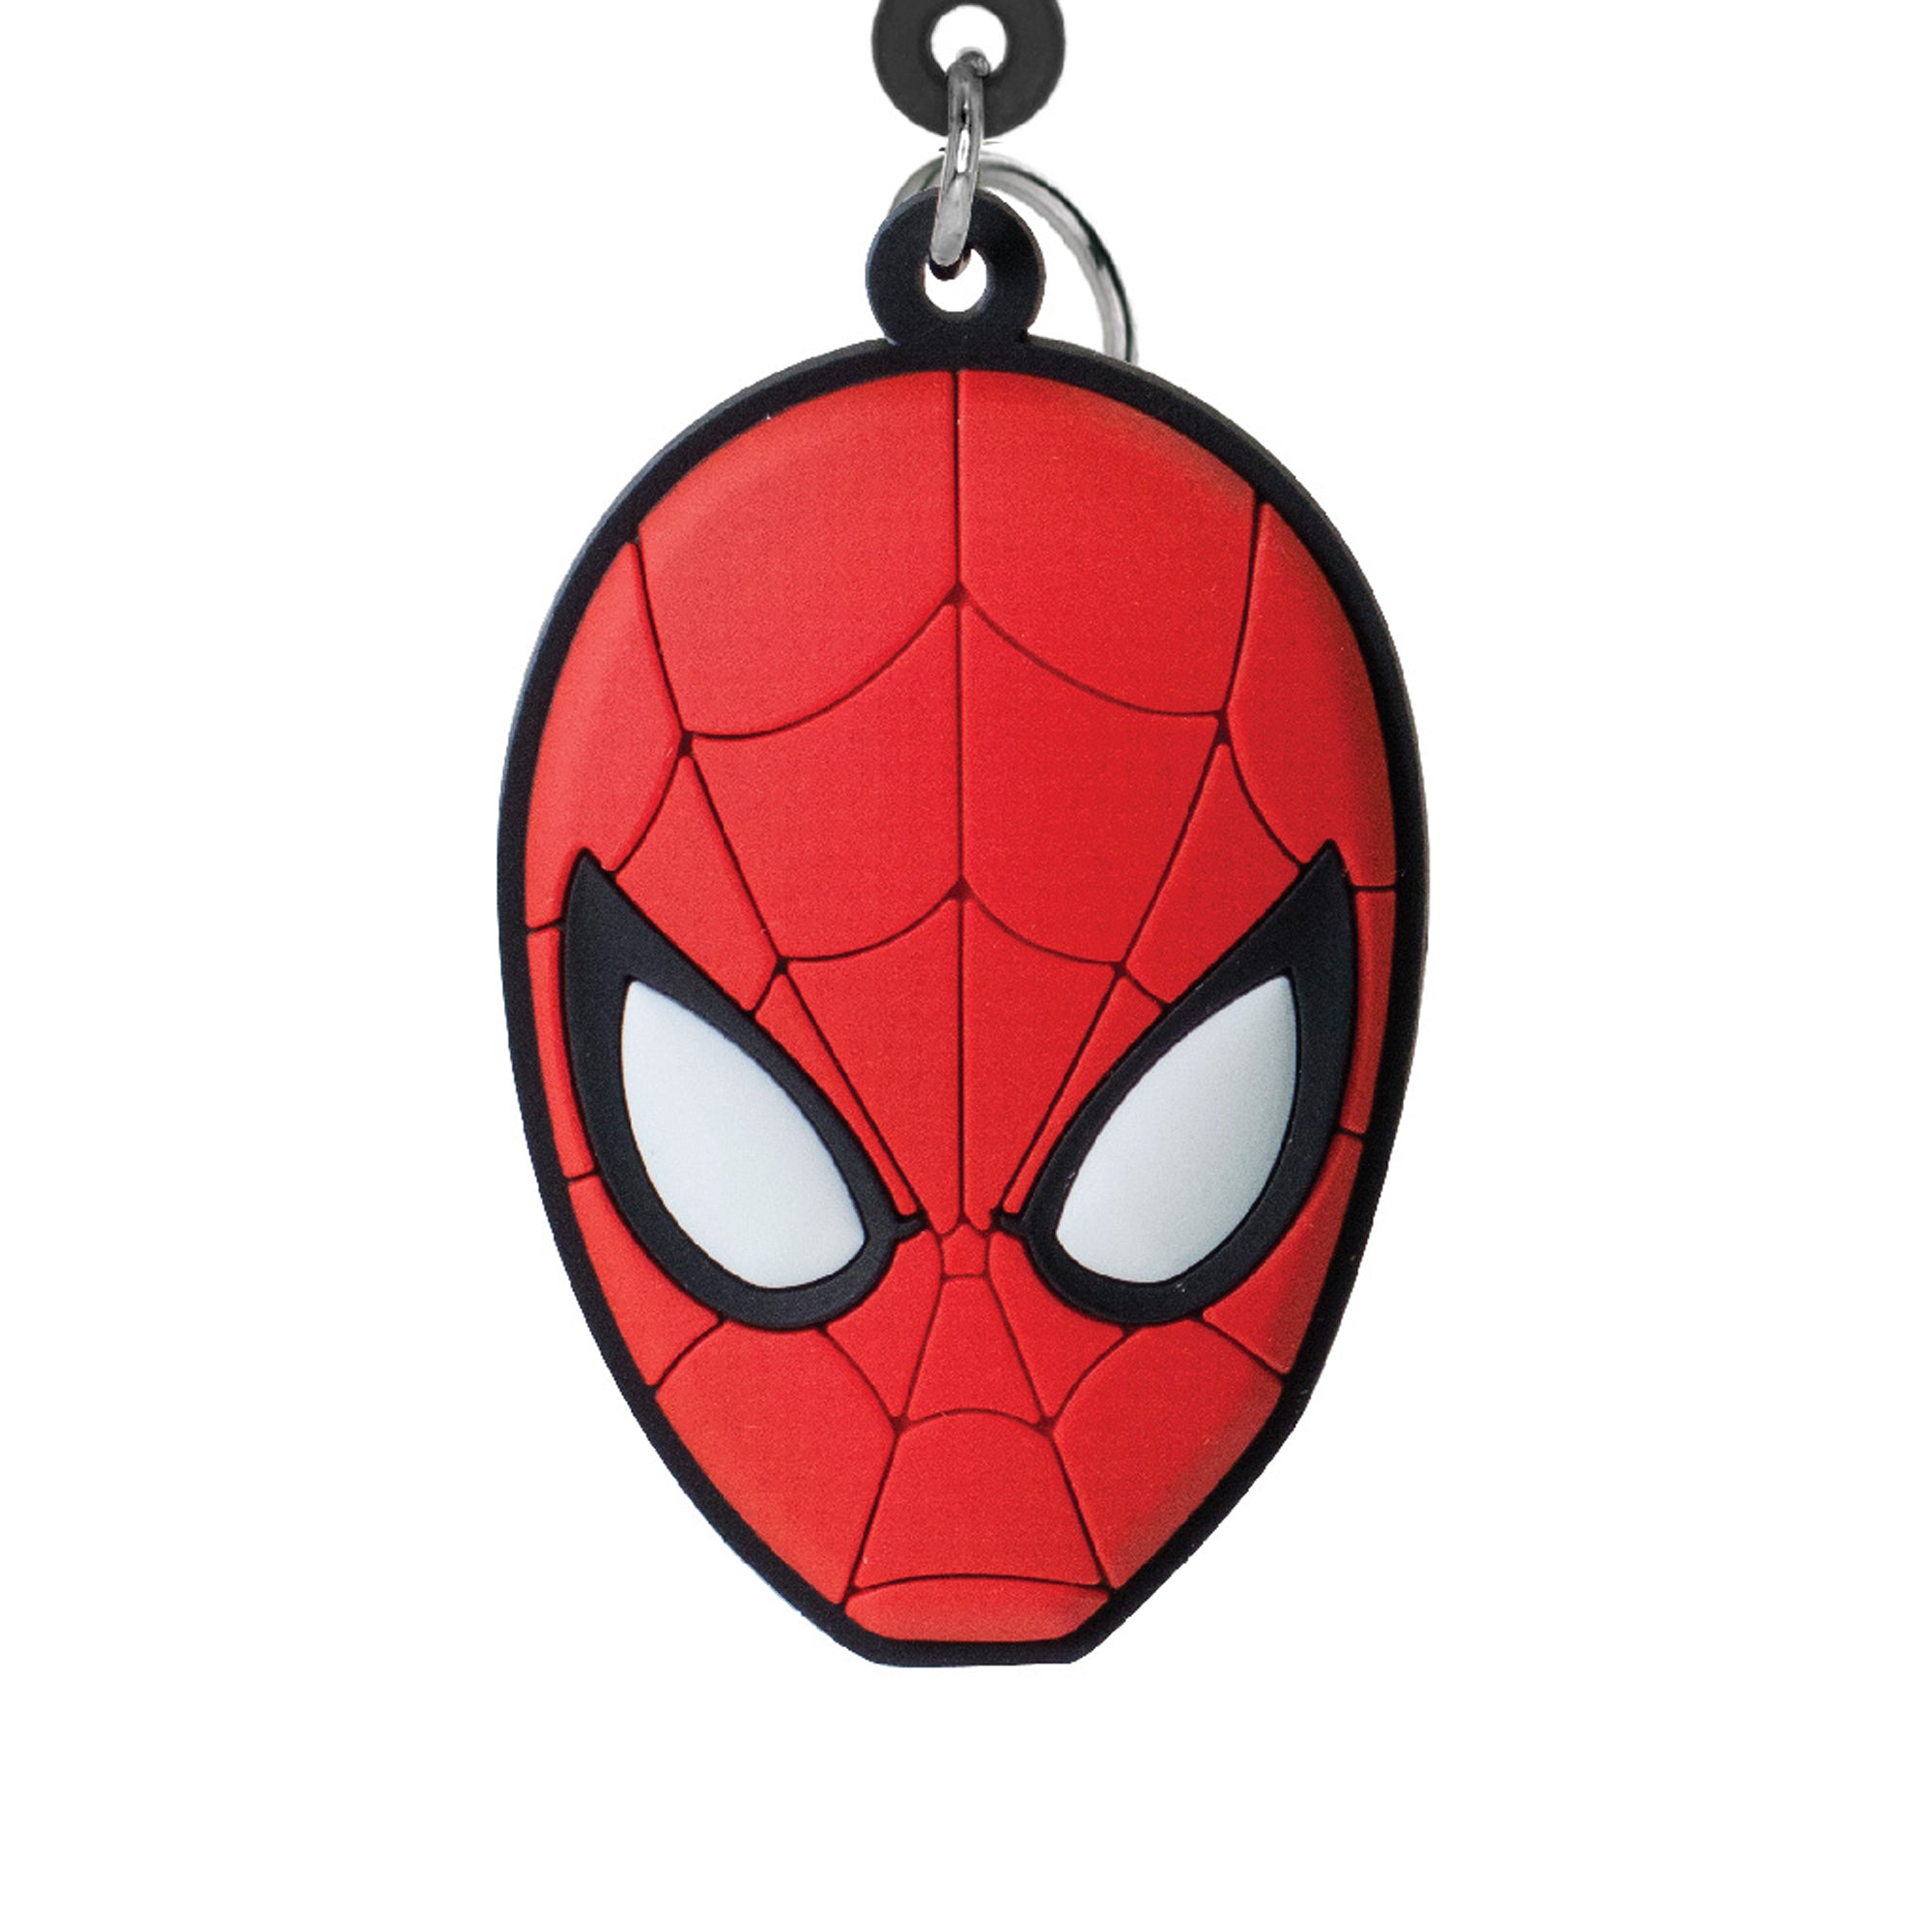 Marvel Spiderman Mask Collectible Soft Touch Bag Clip/Luggage